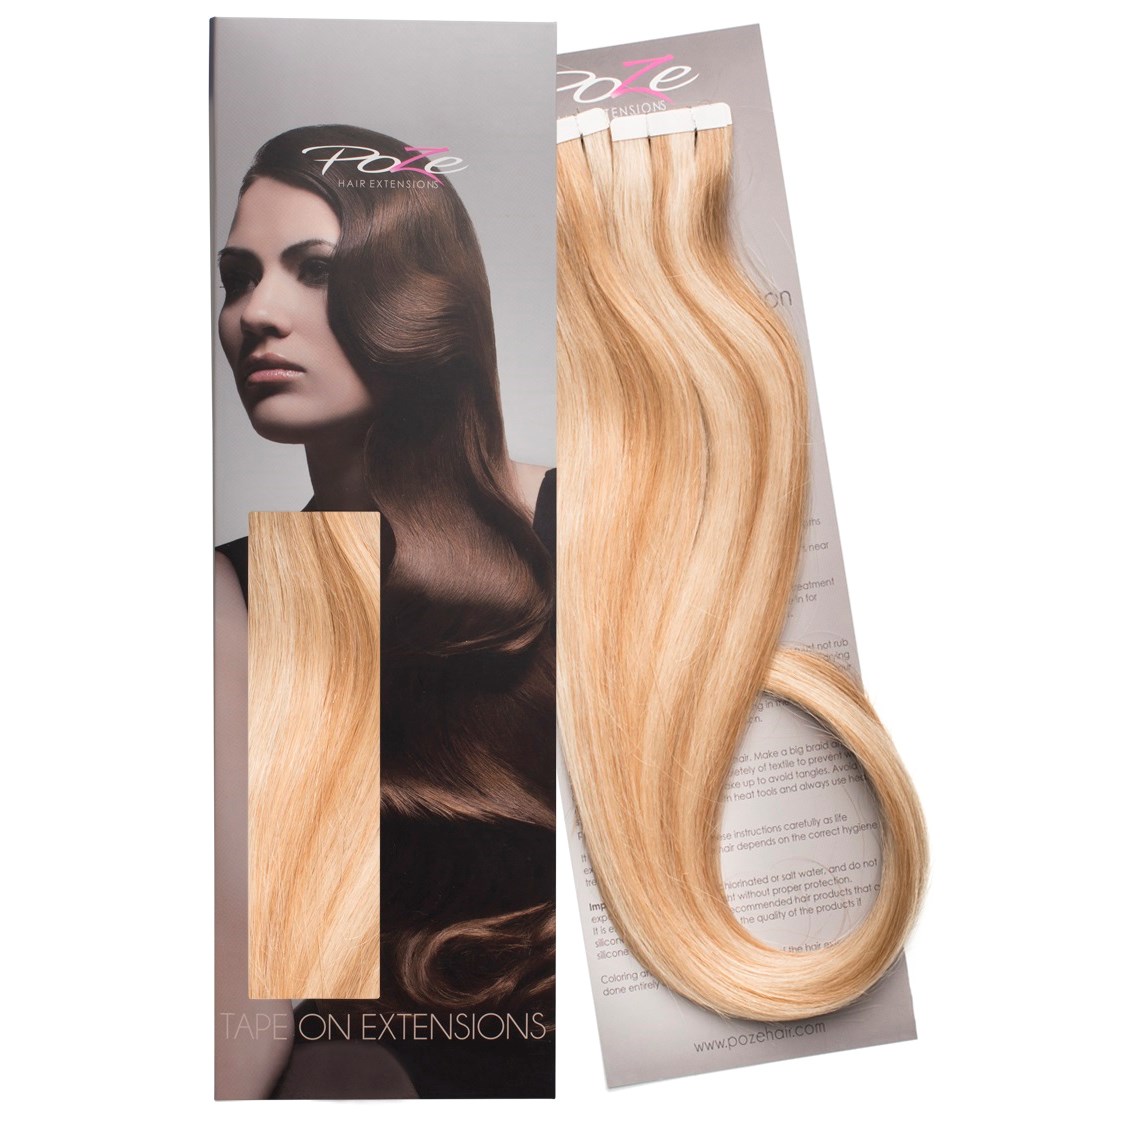 Läs mer om Poze Hairextensions Poze Tape On Extensions P12NA/10B Sunkissed Beige